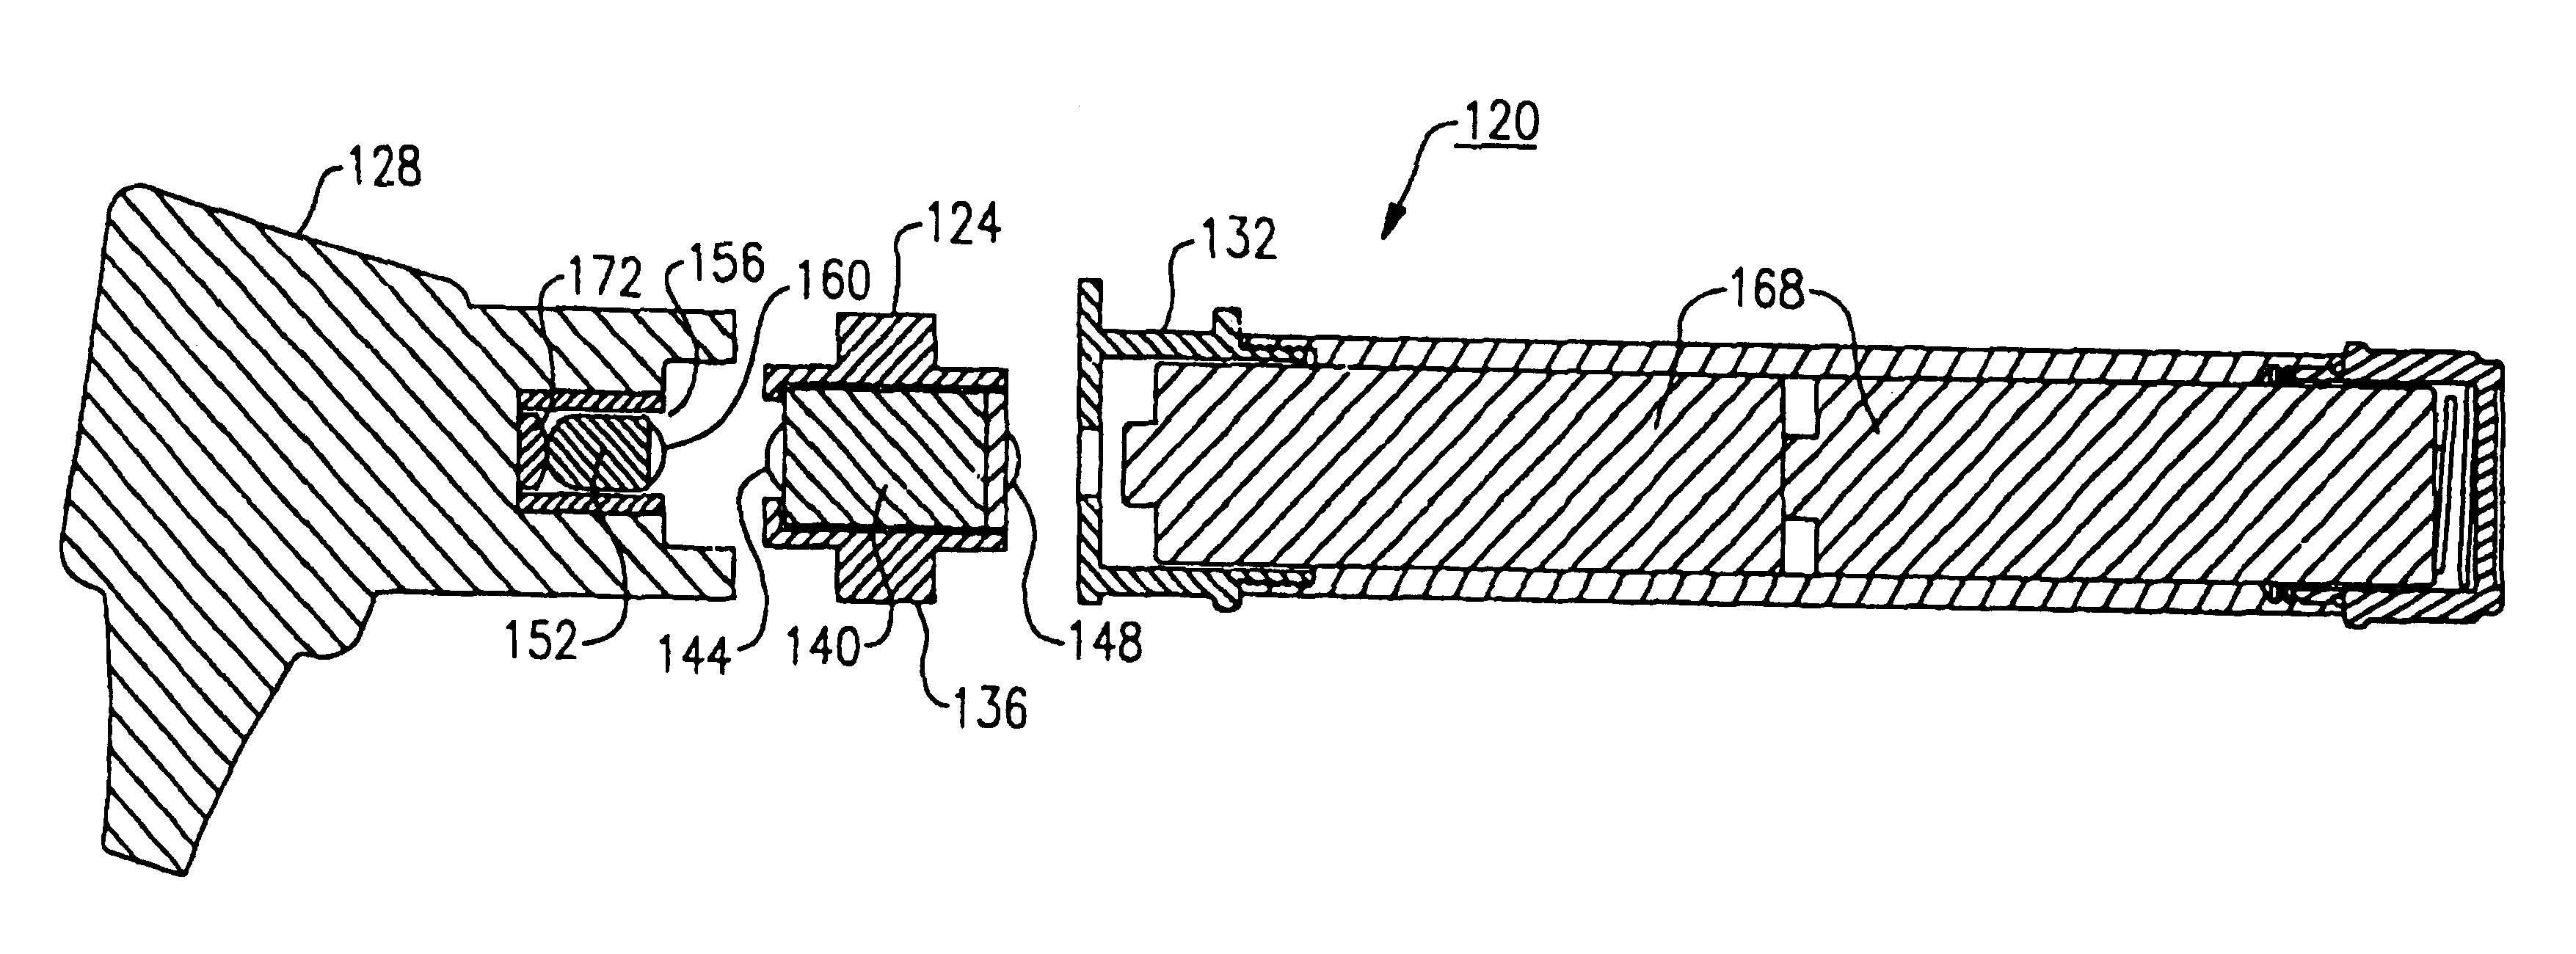 Electrical adapter for medical diagnostic instruments using LEDs as illumination sources